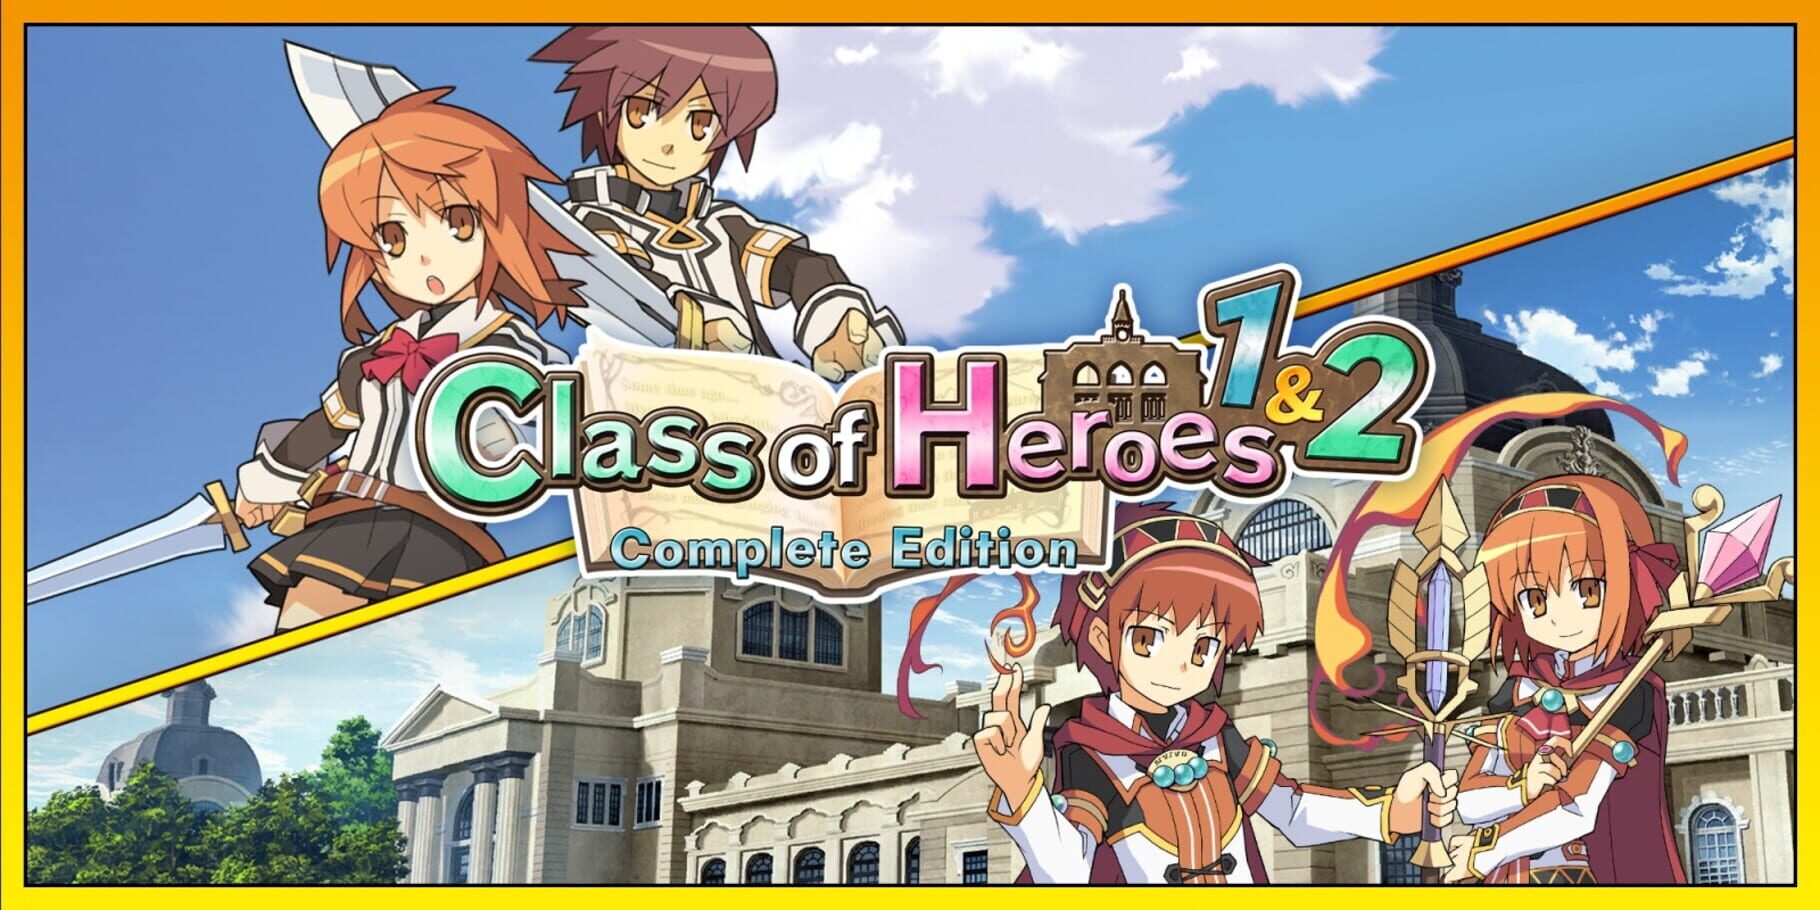 Class of Heroes 1 & 2 Complete Edition artwork